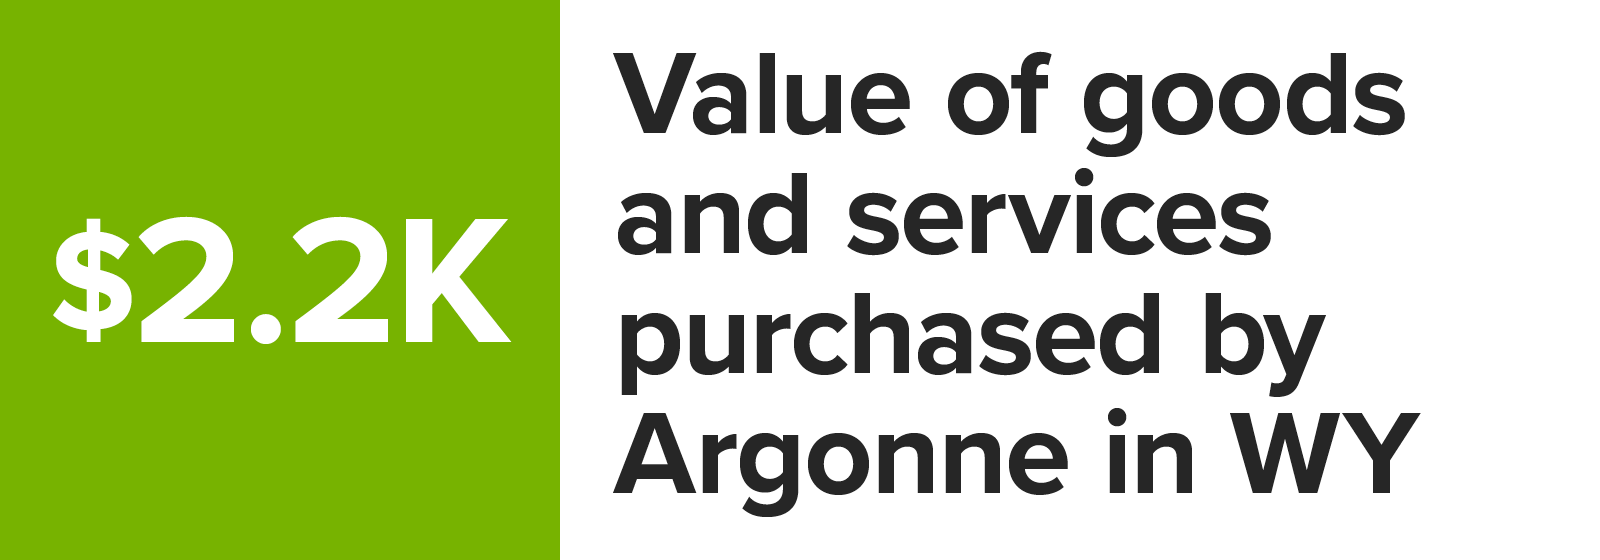 Number graphic value of goods and services purchased by Argonne in Wyoming